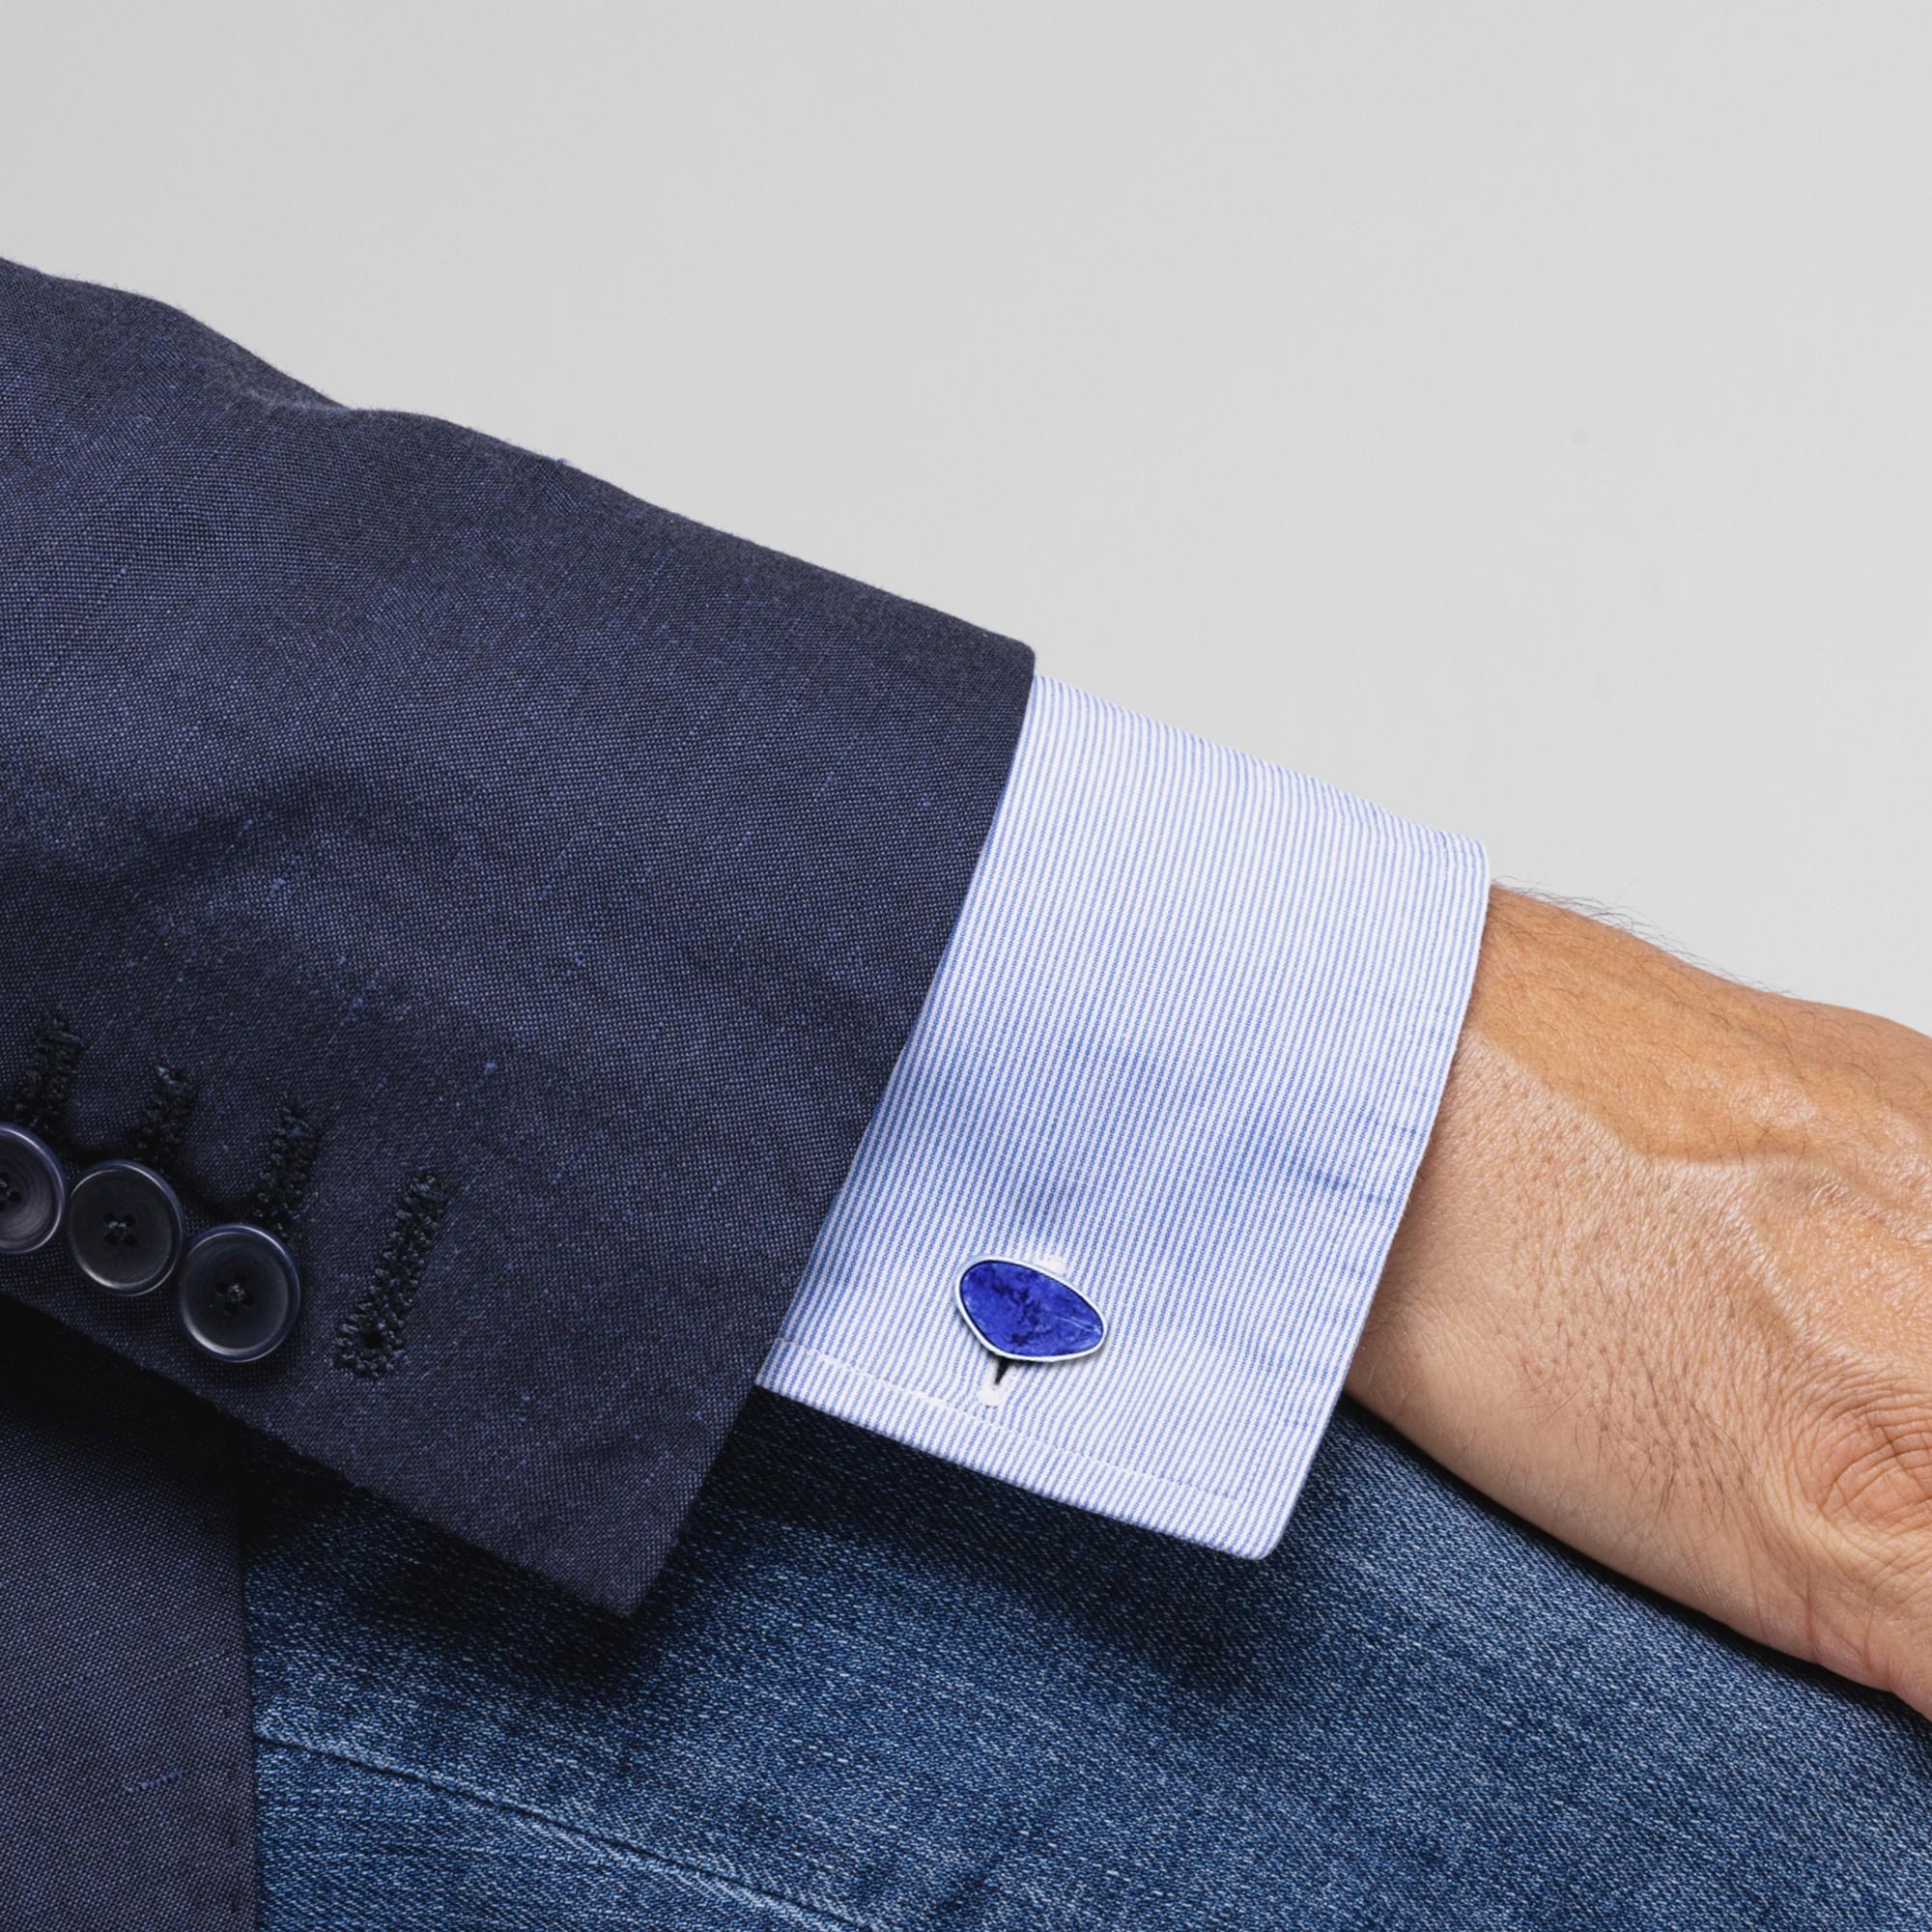 Alex Jona design collection lapis lazuli pebble shape cufflinks mounted in 925/°°°  rhodium Plated sterling silver. Marked JONA 925.
Alex Jona cufflinks stand out, not only for their special design and for the excellent quality, but also for the